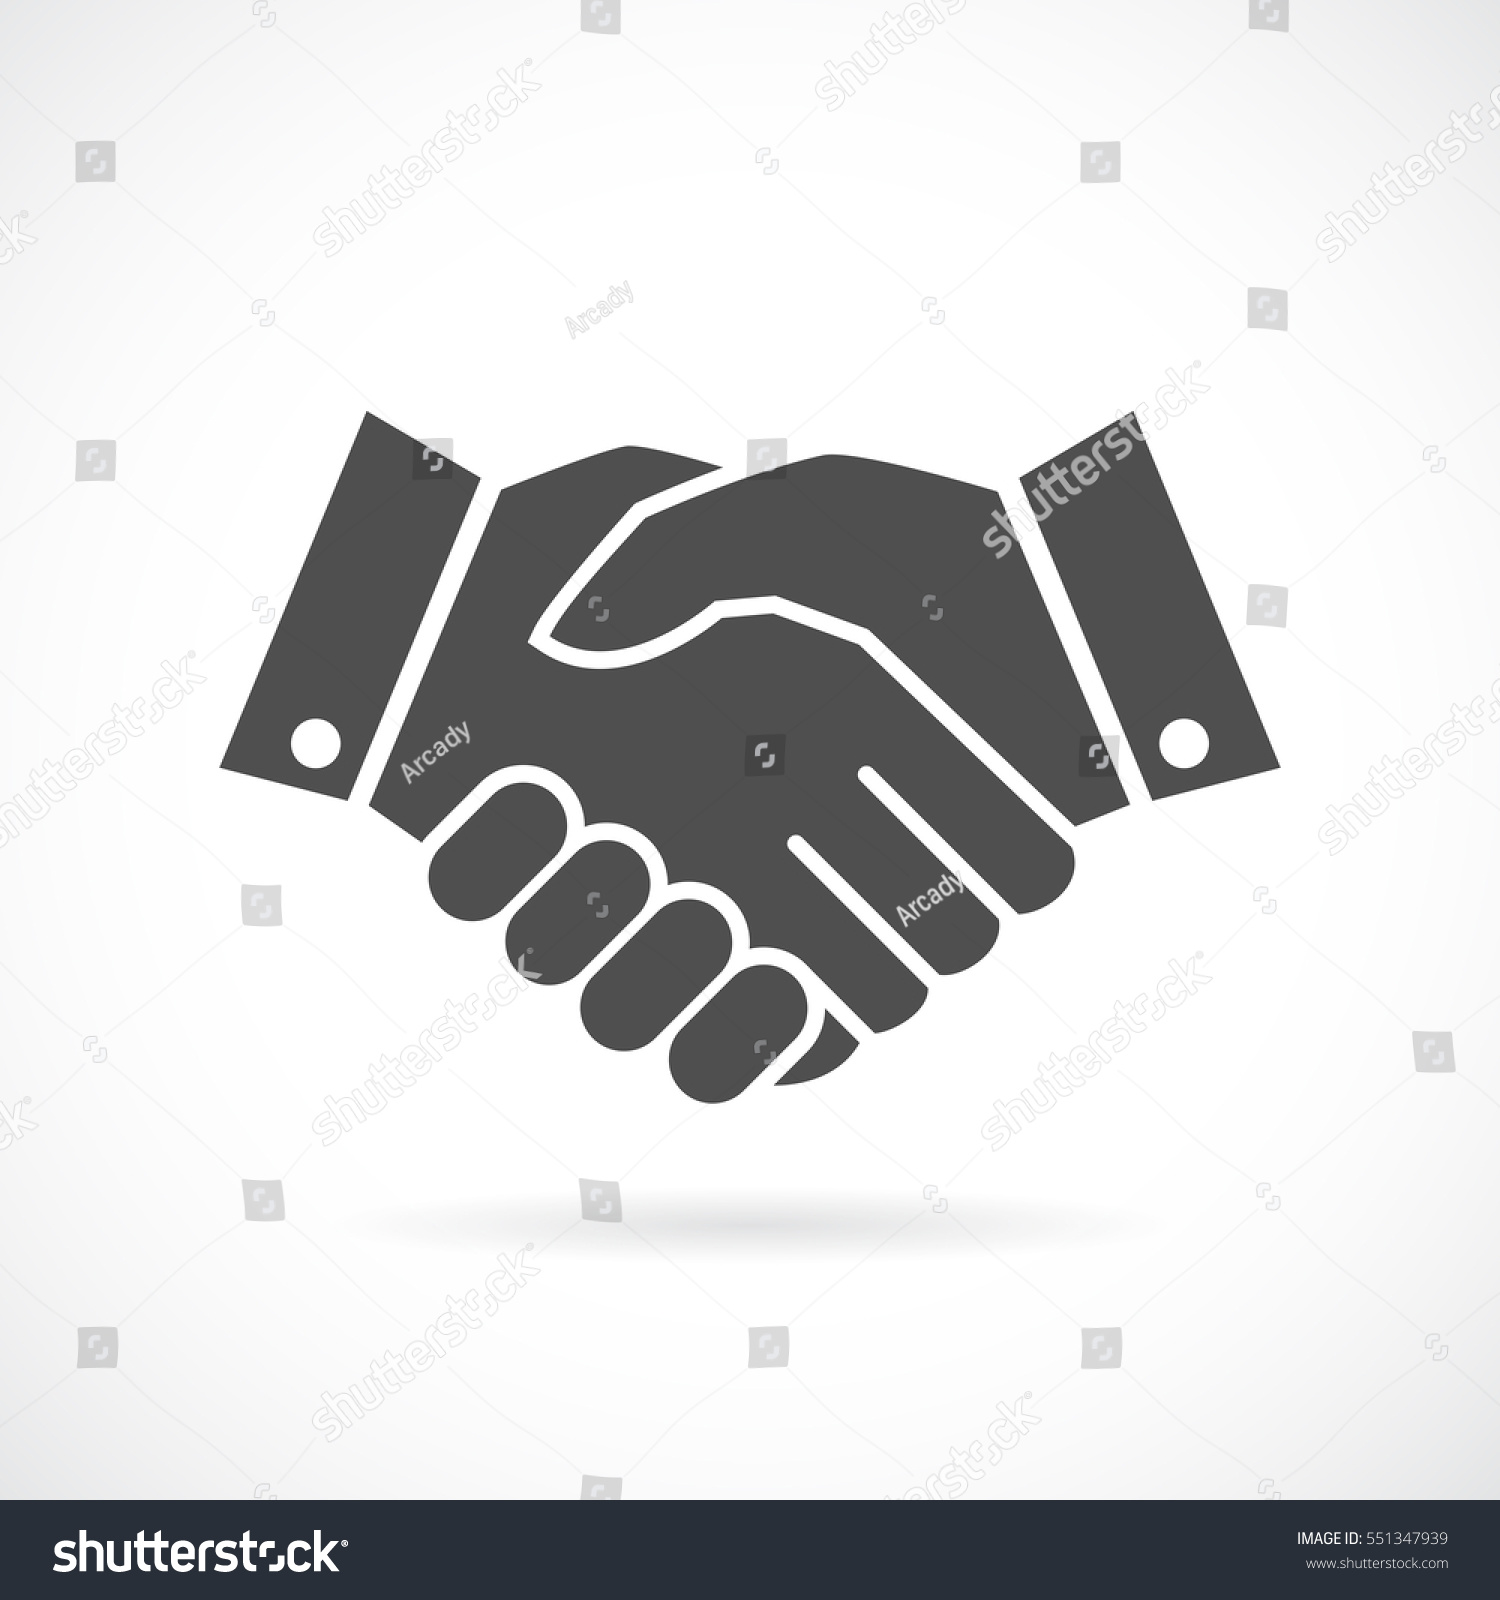 Handshake Business Vector Icon On White Background - 551347939